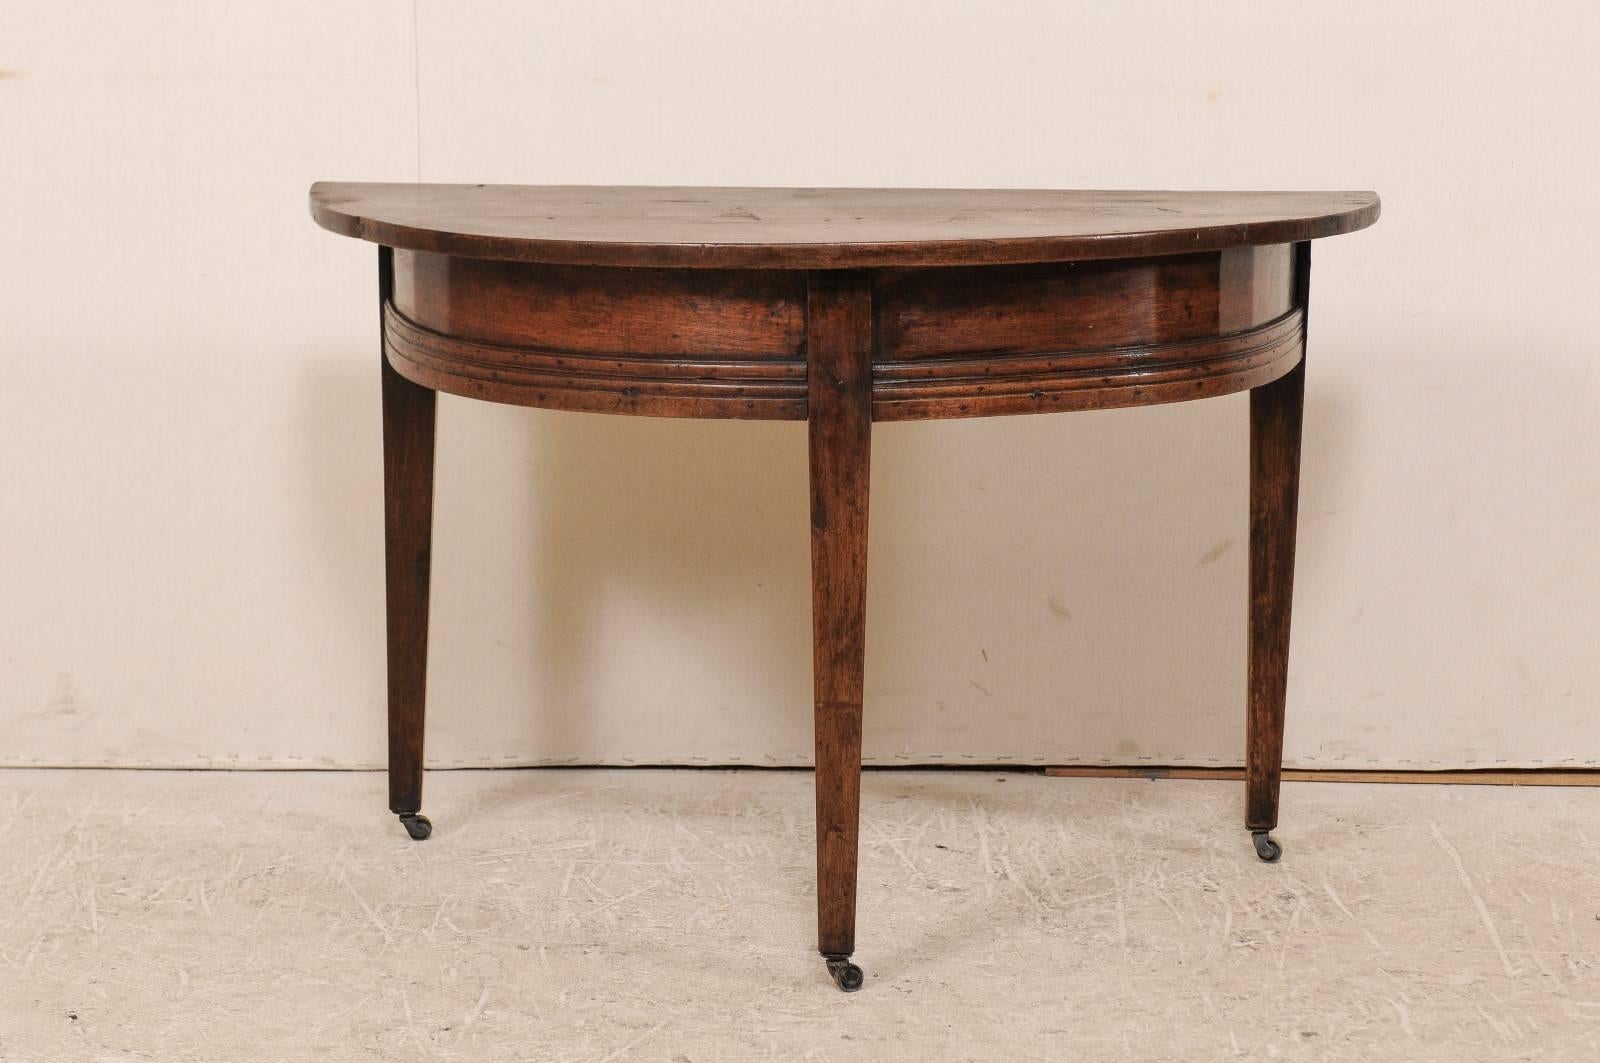 A late 18th century Italian demilune console table. This Italian console table from the late 18th century features nice clean lines, a simple rounded apron with stacked trim detailing across the bottom. The table is raised on three squared and